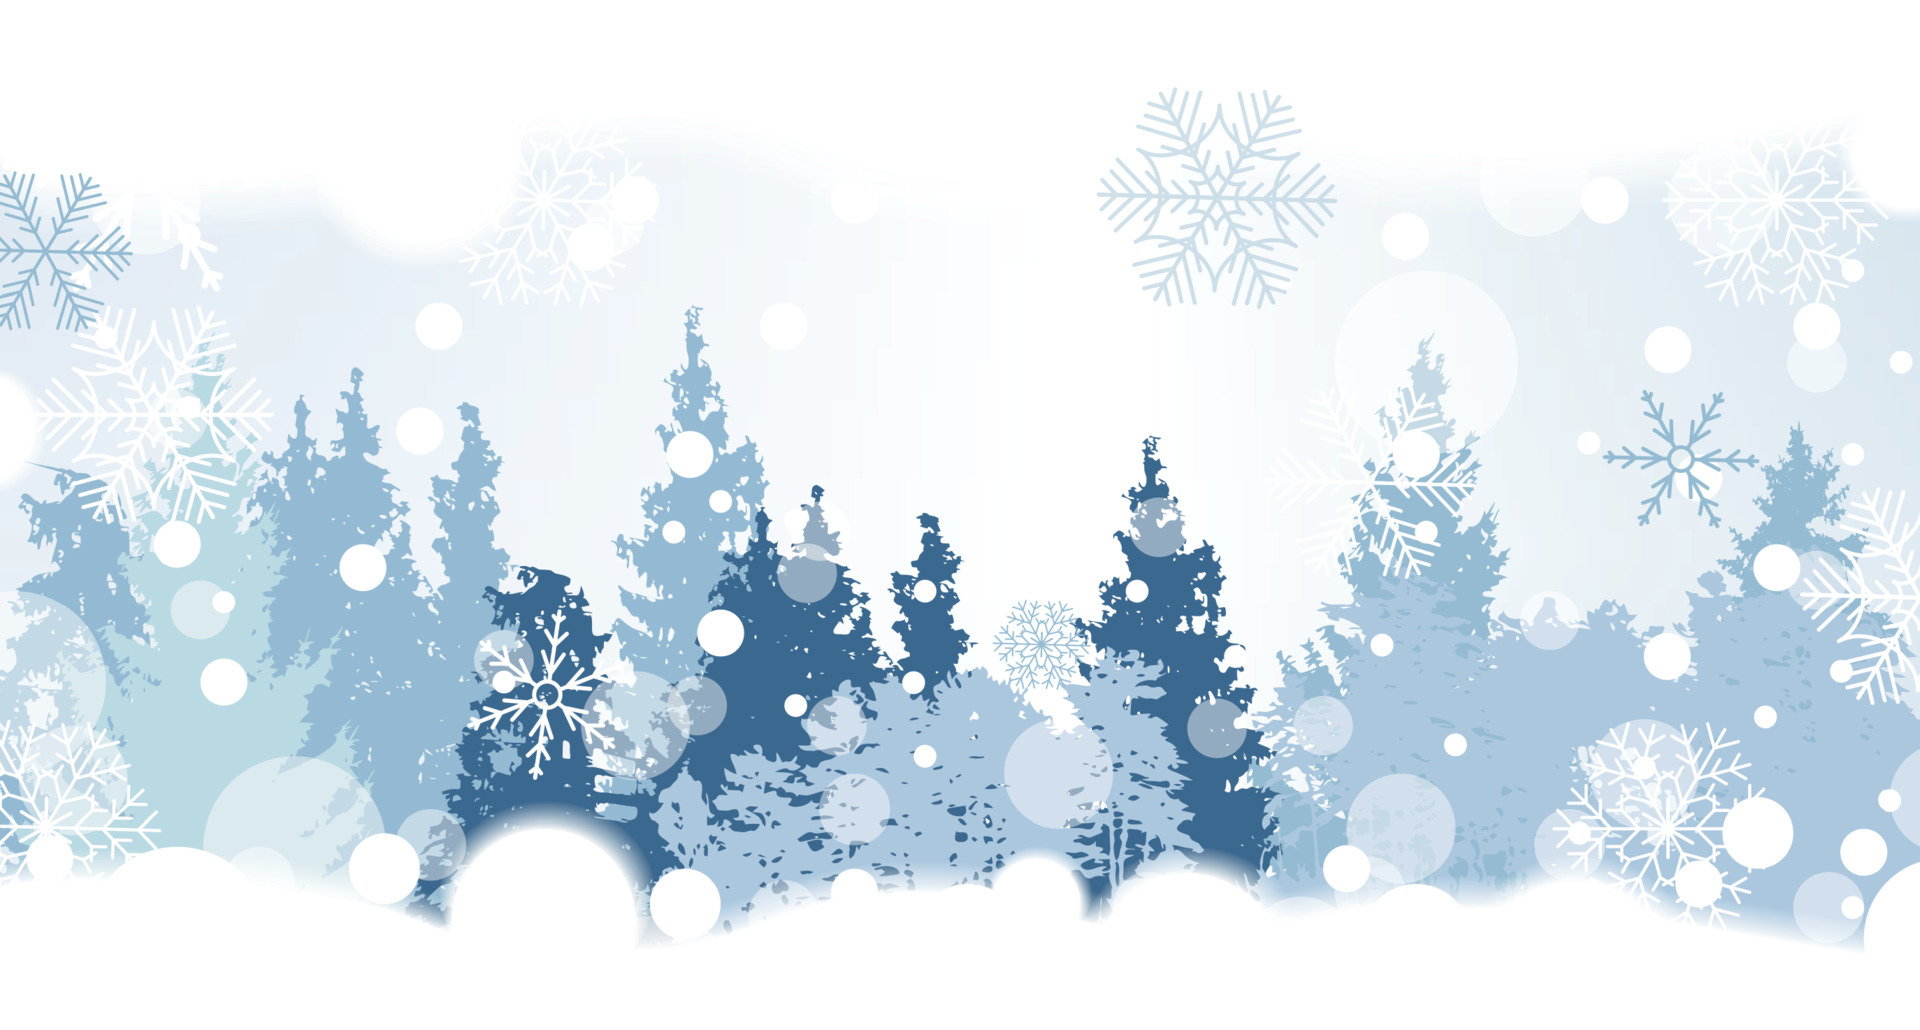 Free Vector  Winter tree with birds. season nature, snow on wood,  snowflake and plant, vector illustration